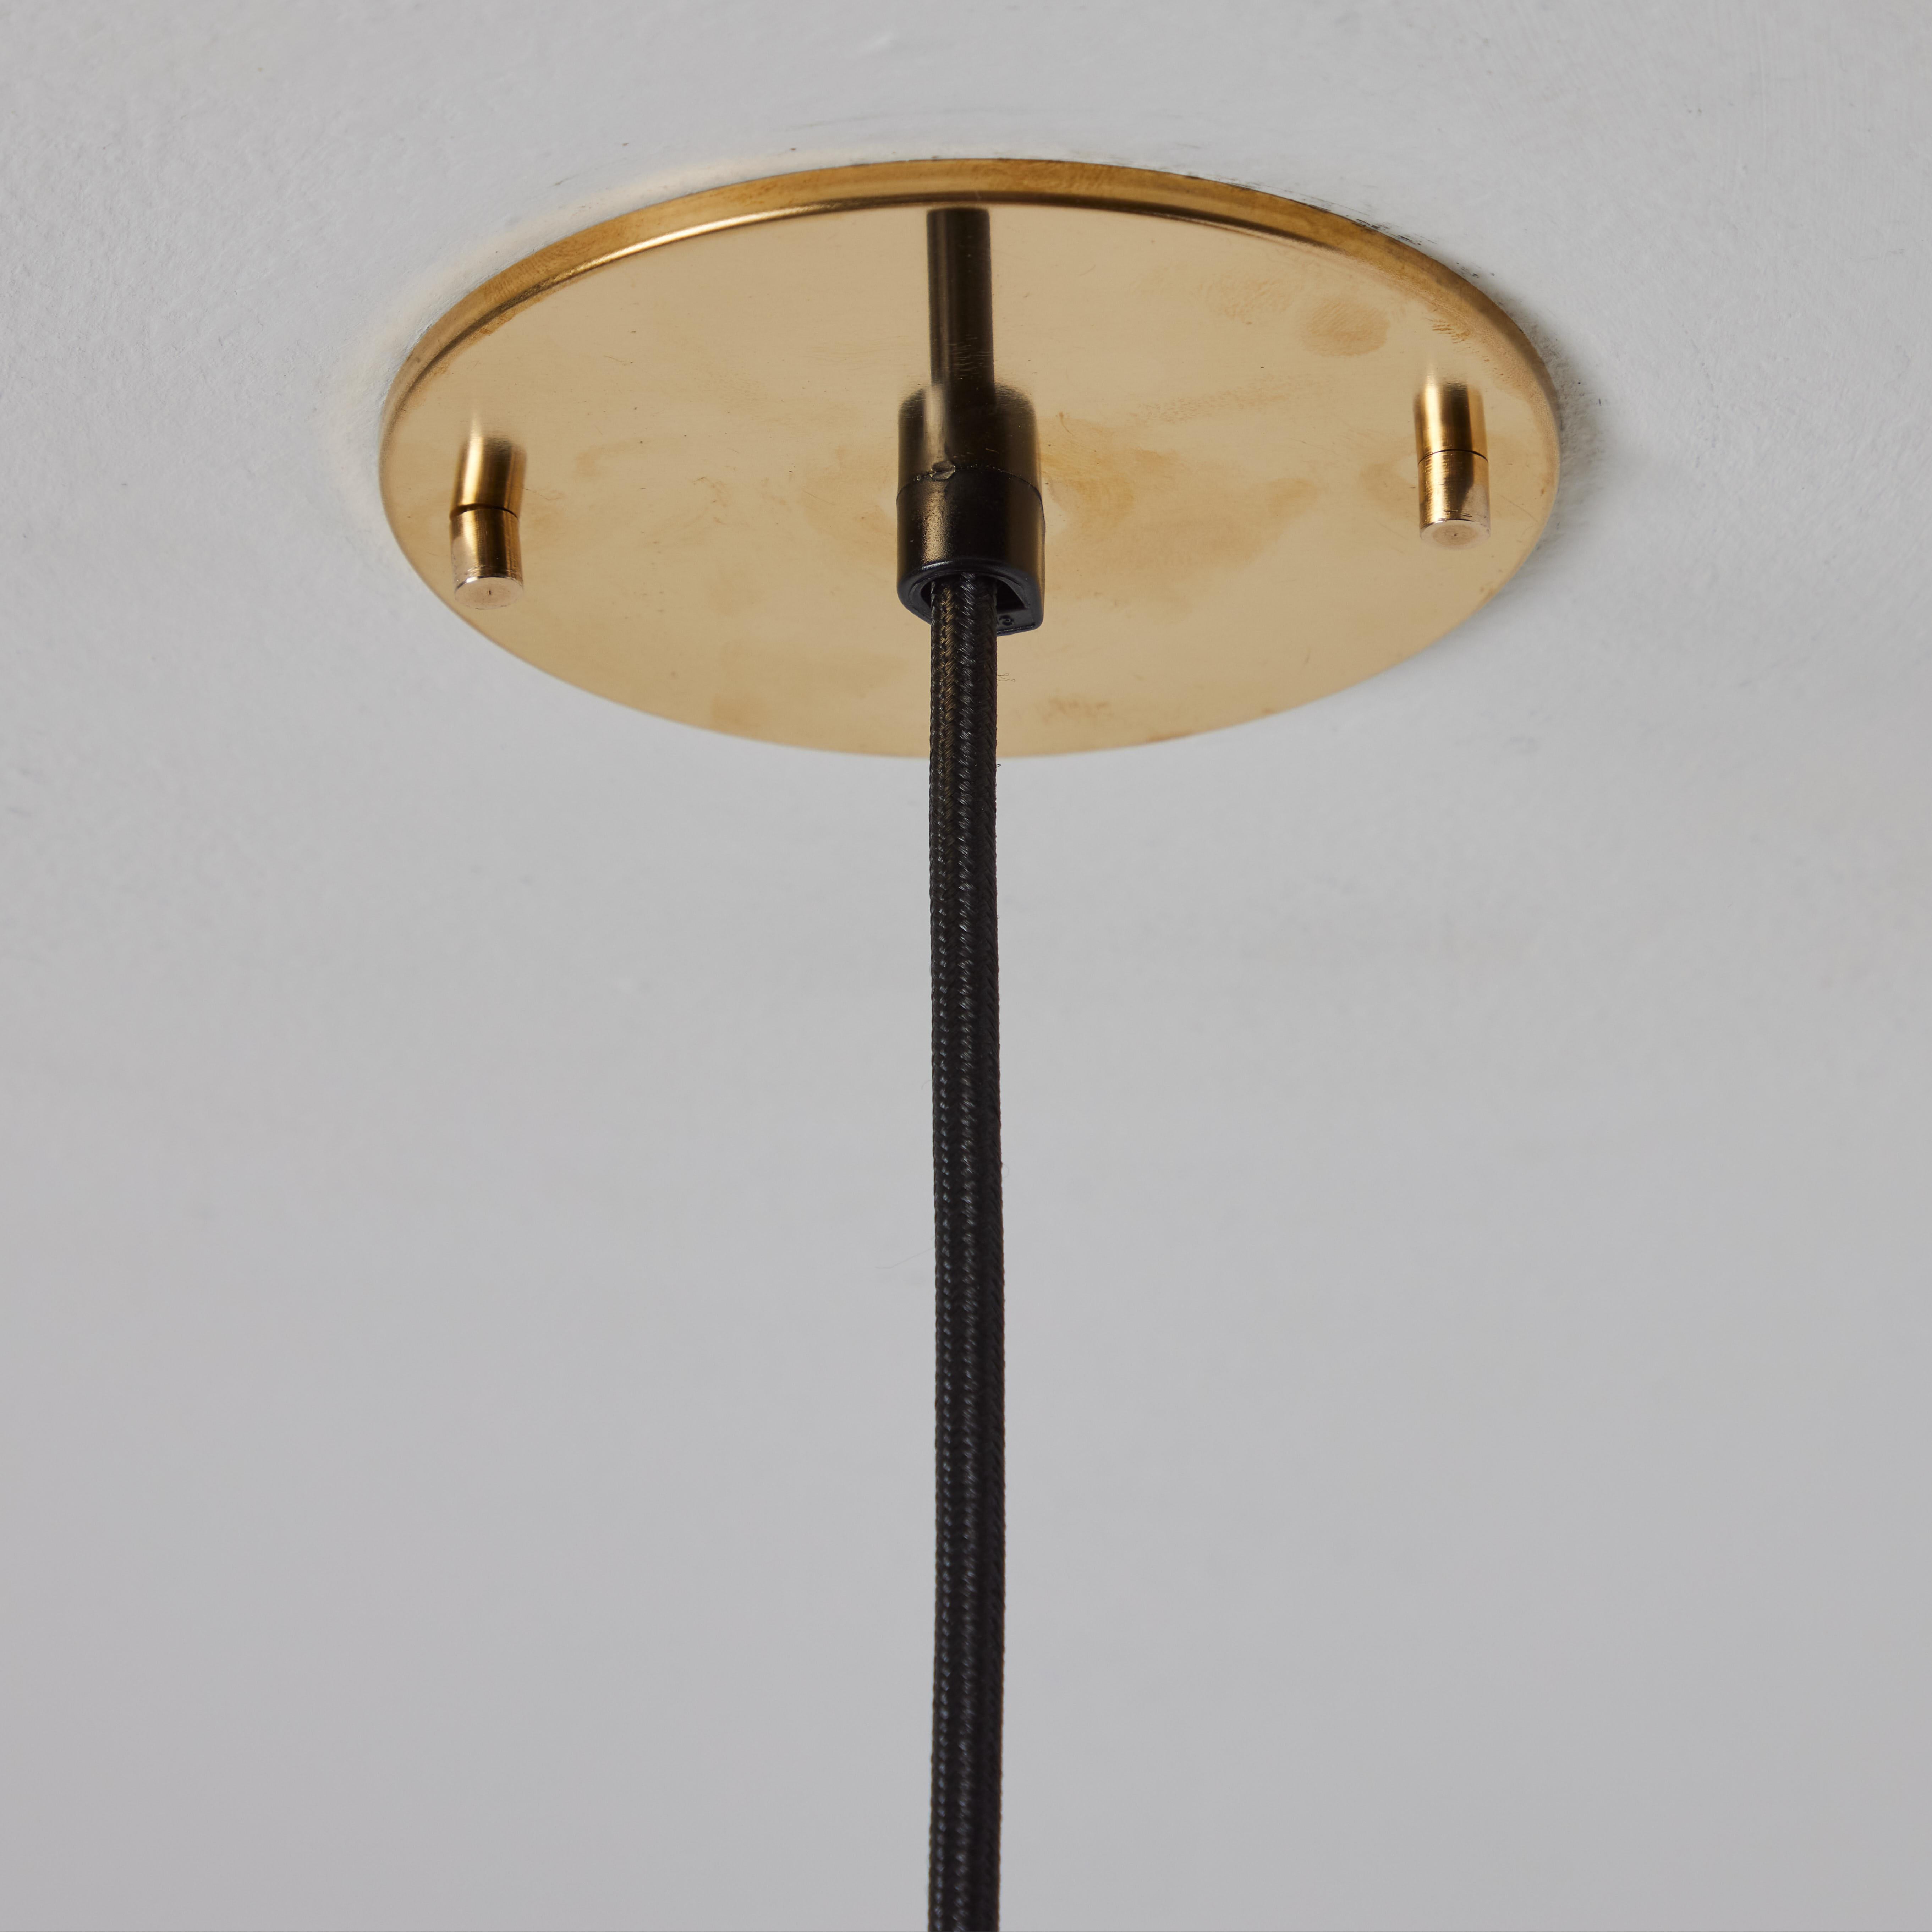 1950s Finnish Perforated Brass Pendant In The Manner of Paavo Tynell For Sale 2